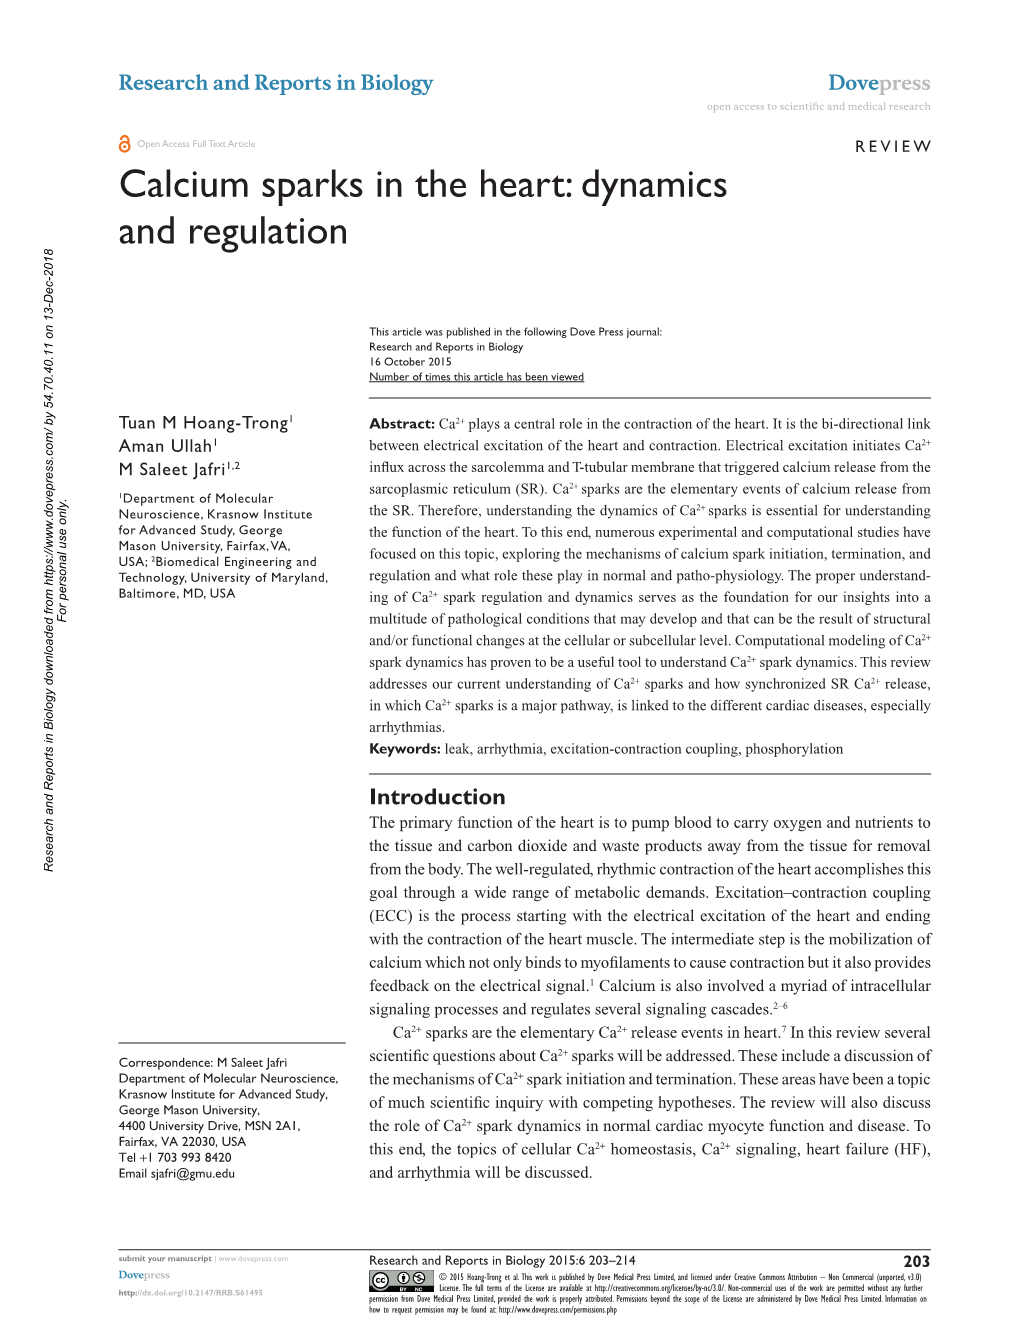 Calcium Sparks in the Heart: Dynamics and Regulation